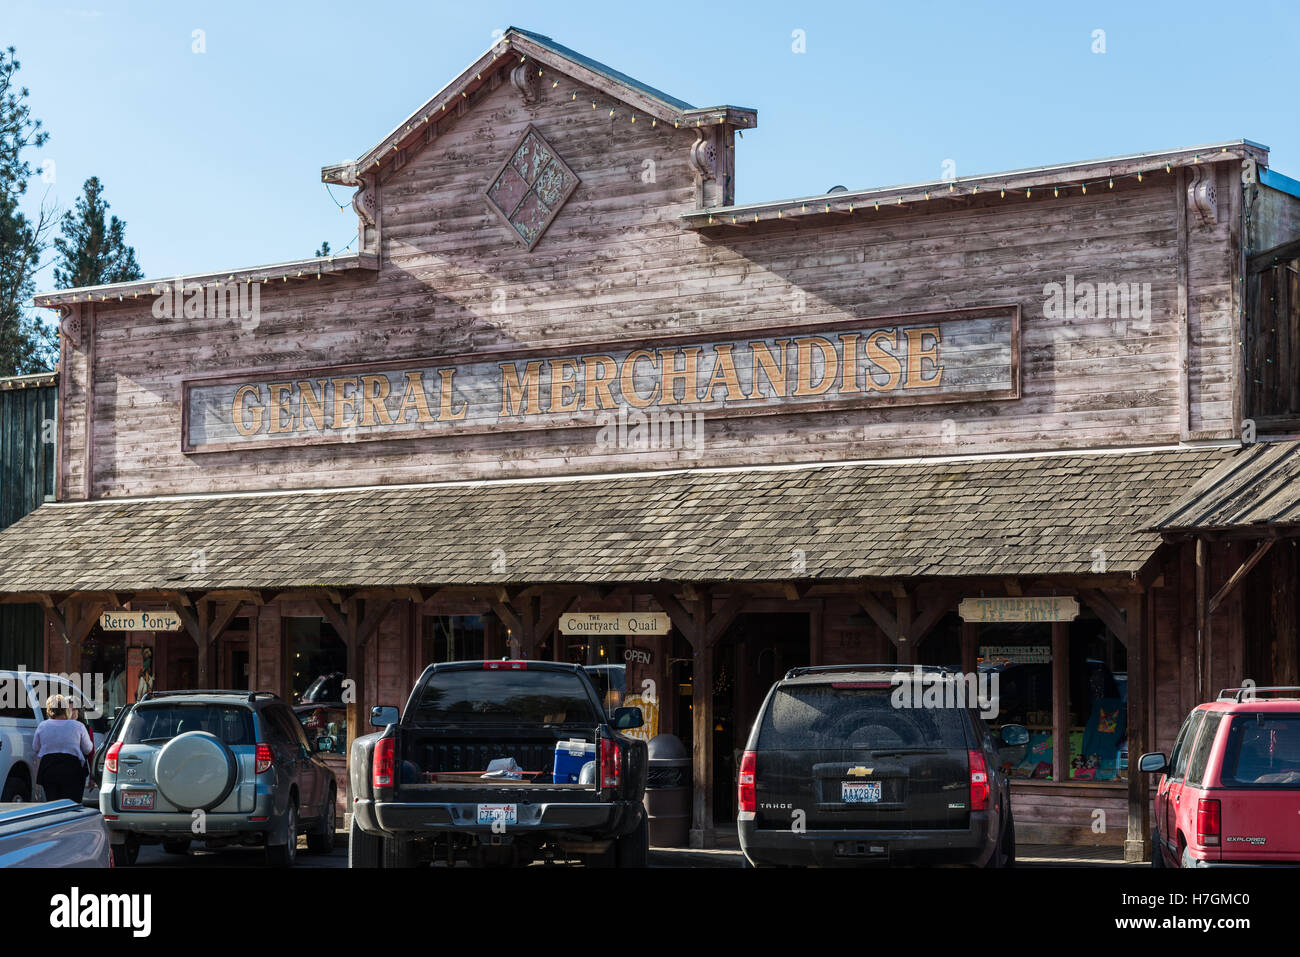 General store at a traditional western town Winthrop, Washington, USA. Stock Photo